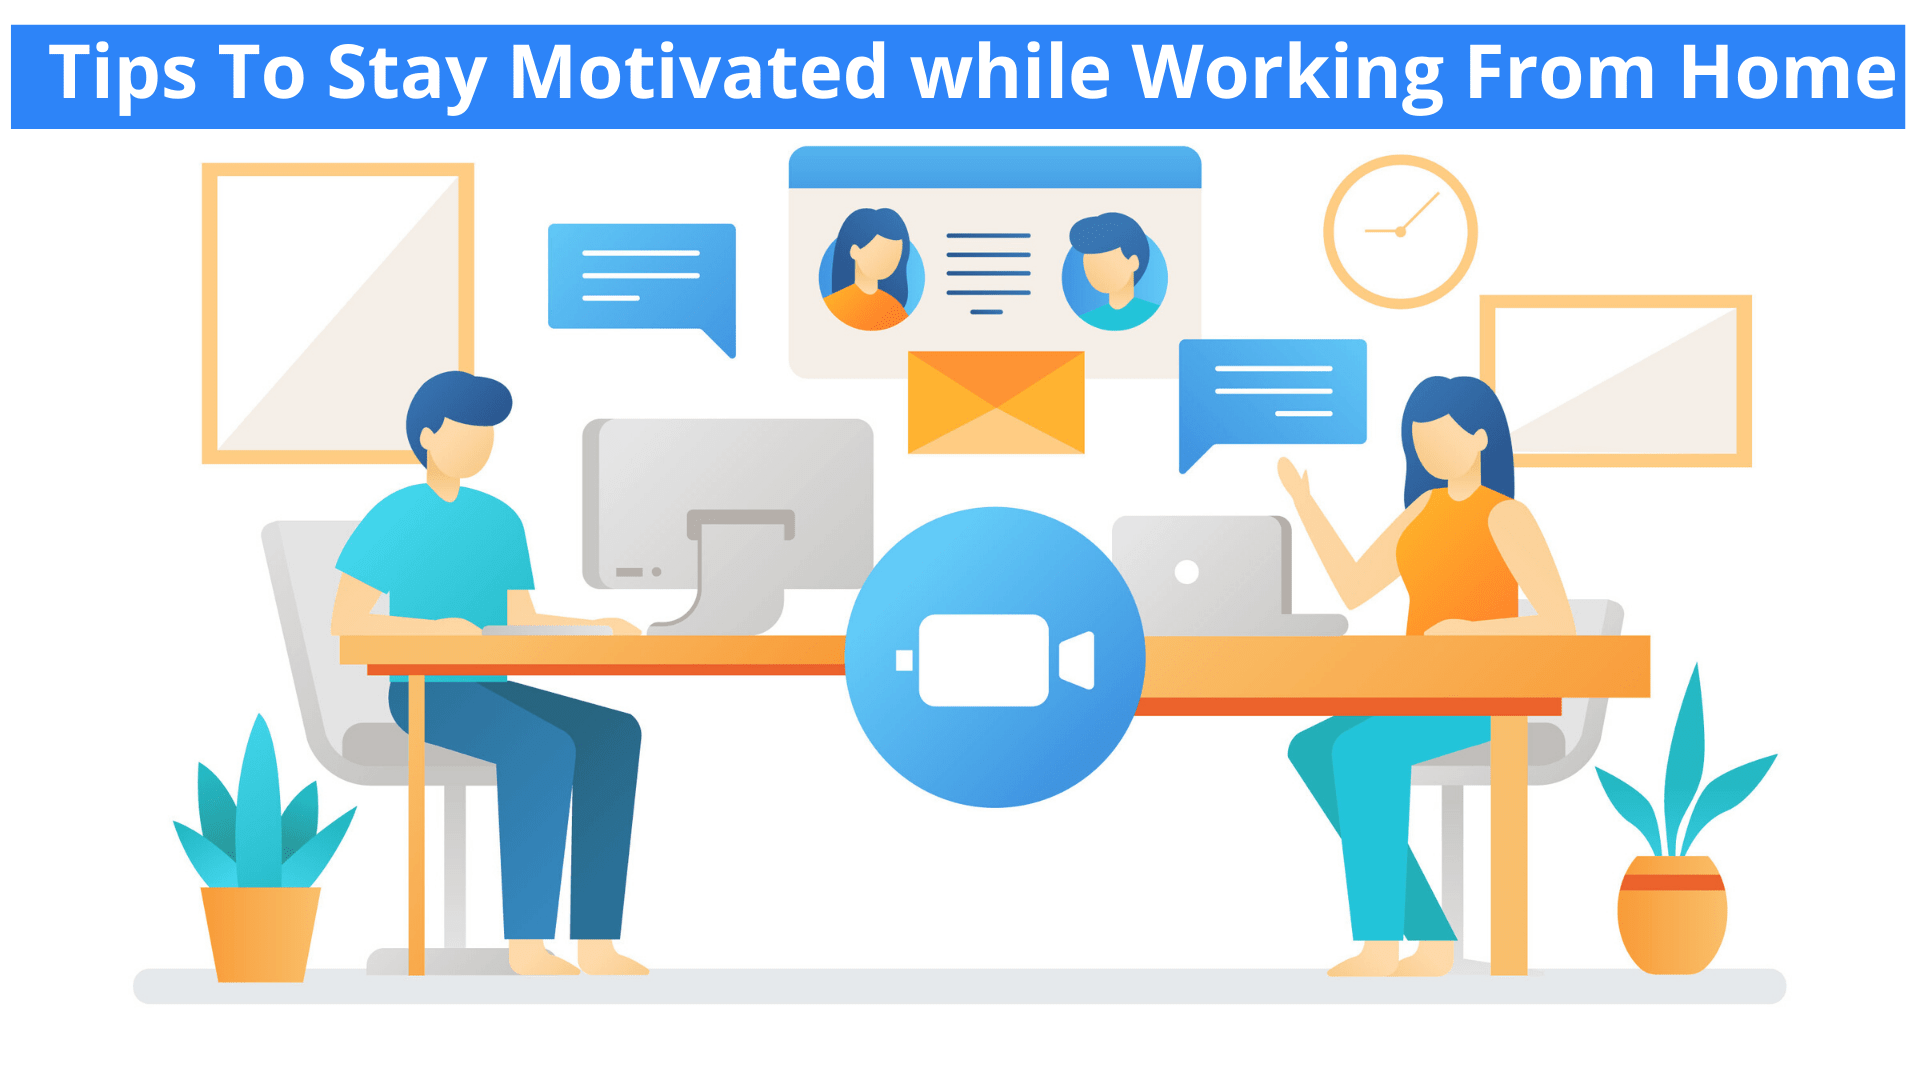 How To Stay Motivated While Working From Home?